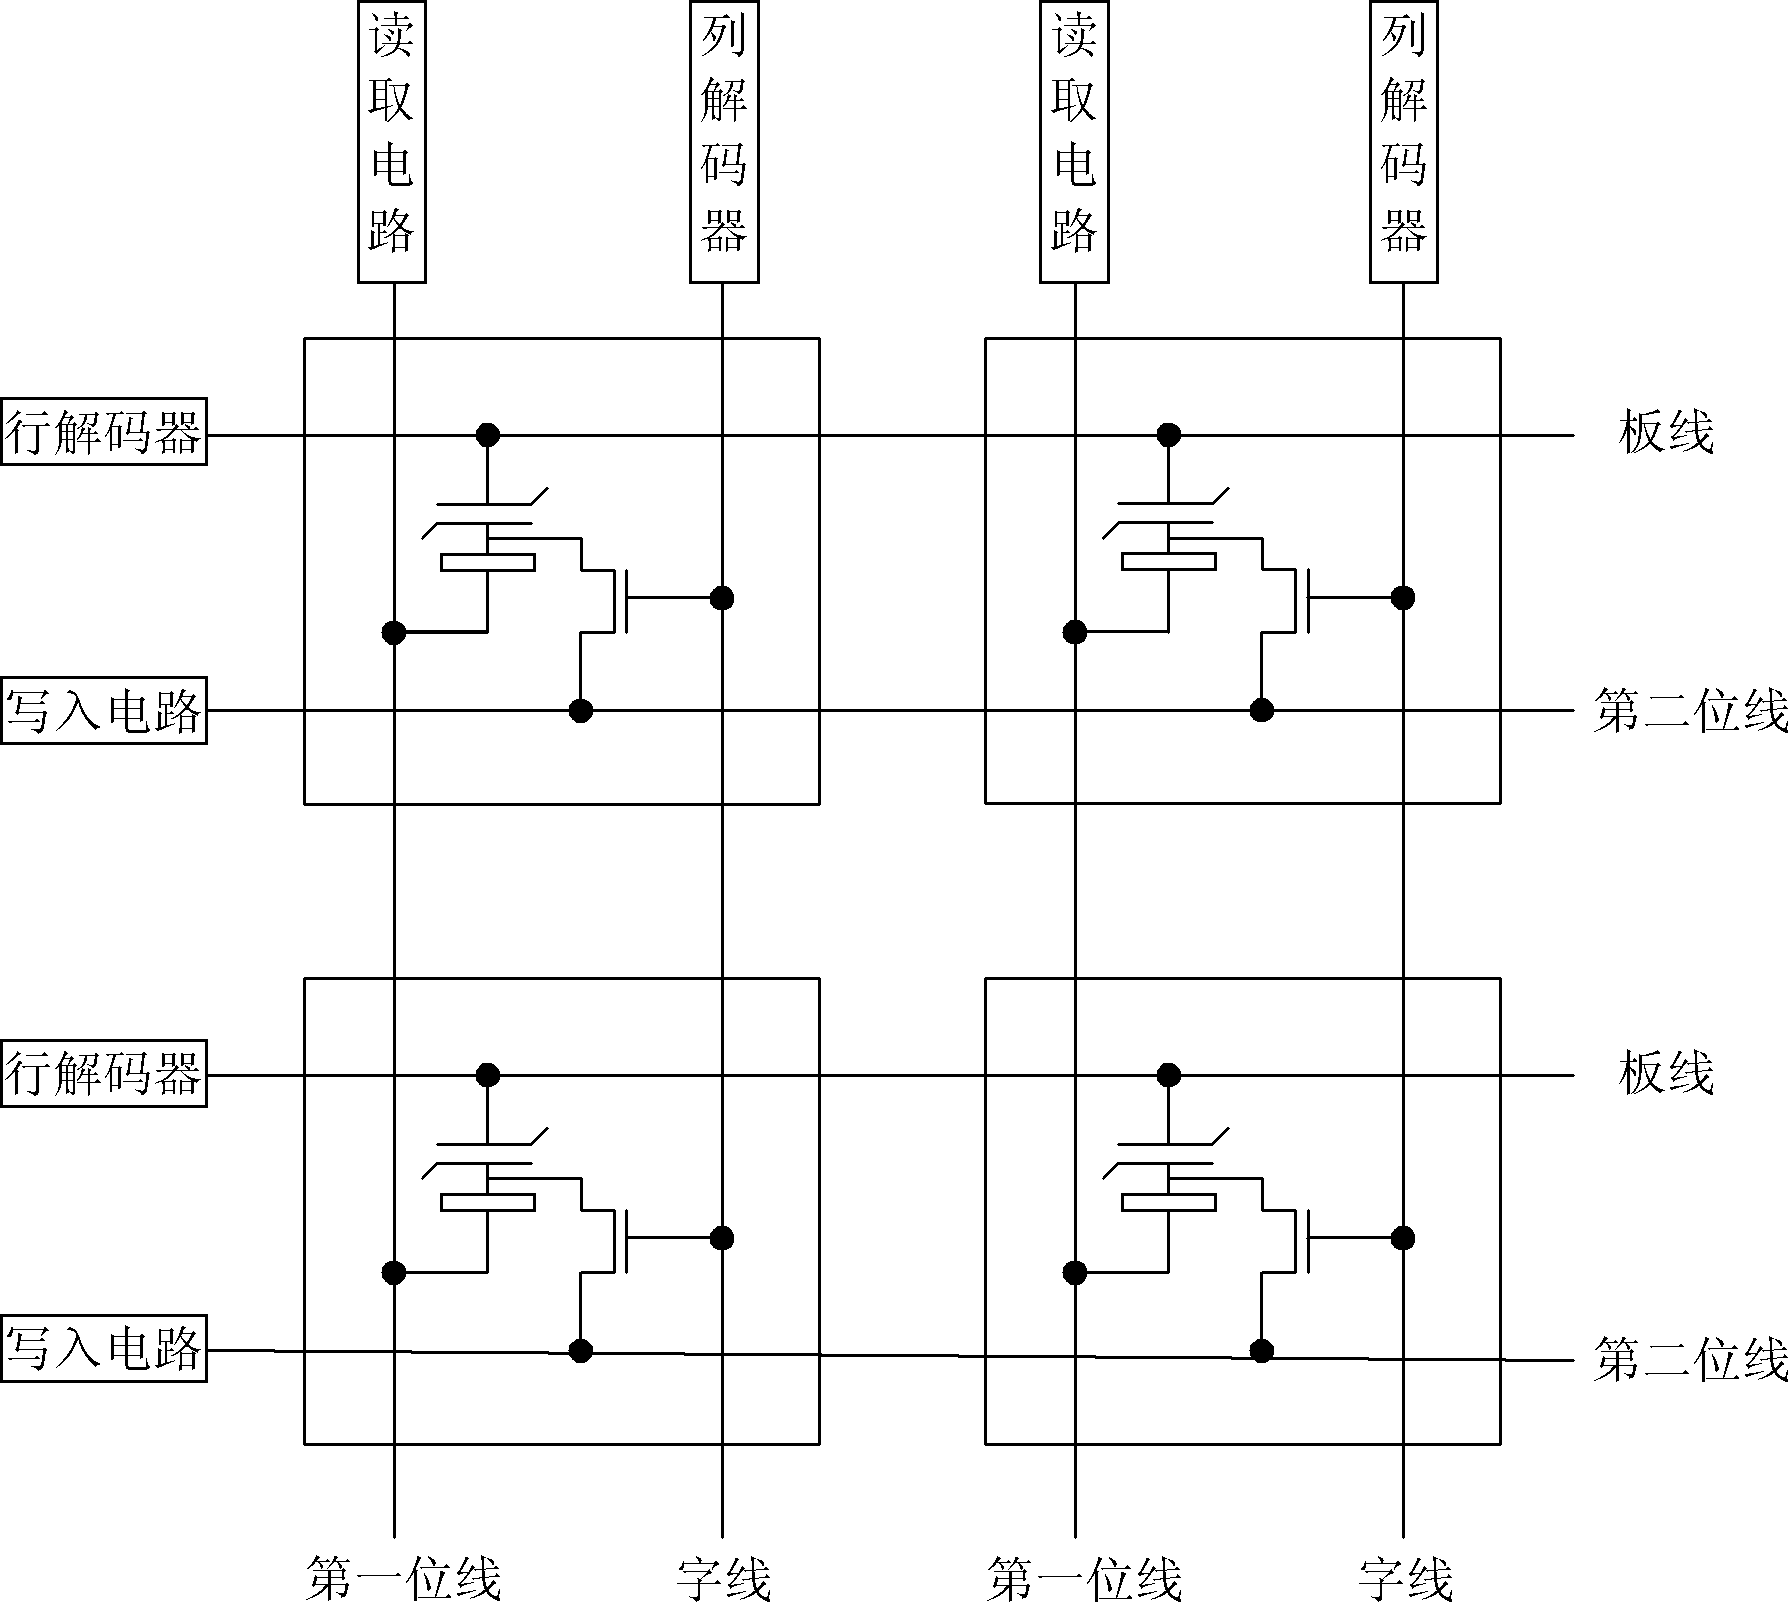 Voltage-adjustable reluctance-variable random memory cell and random memory